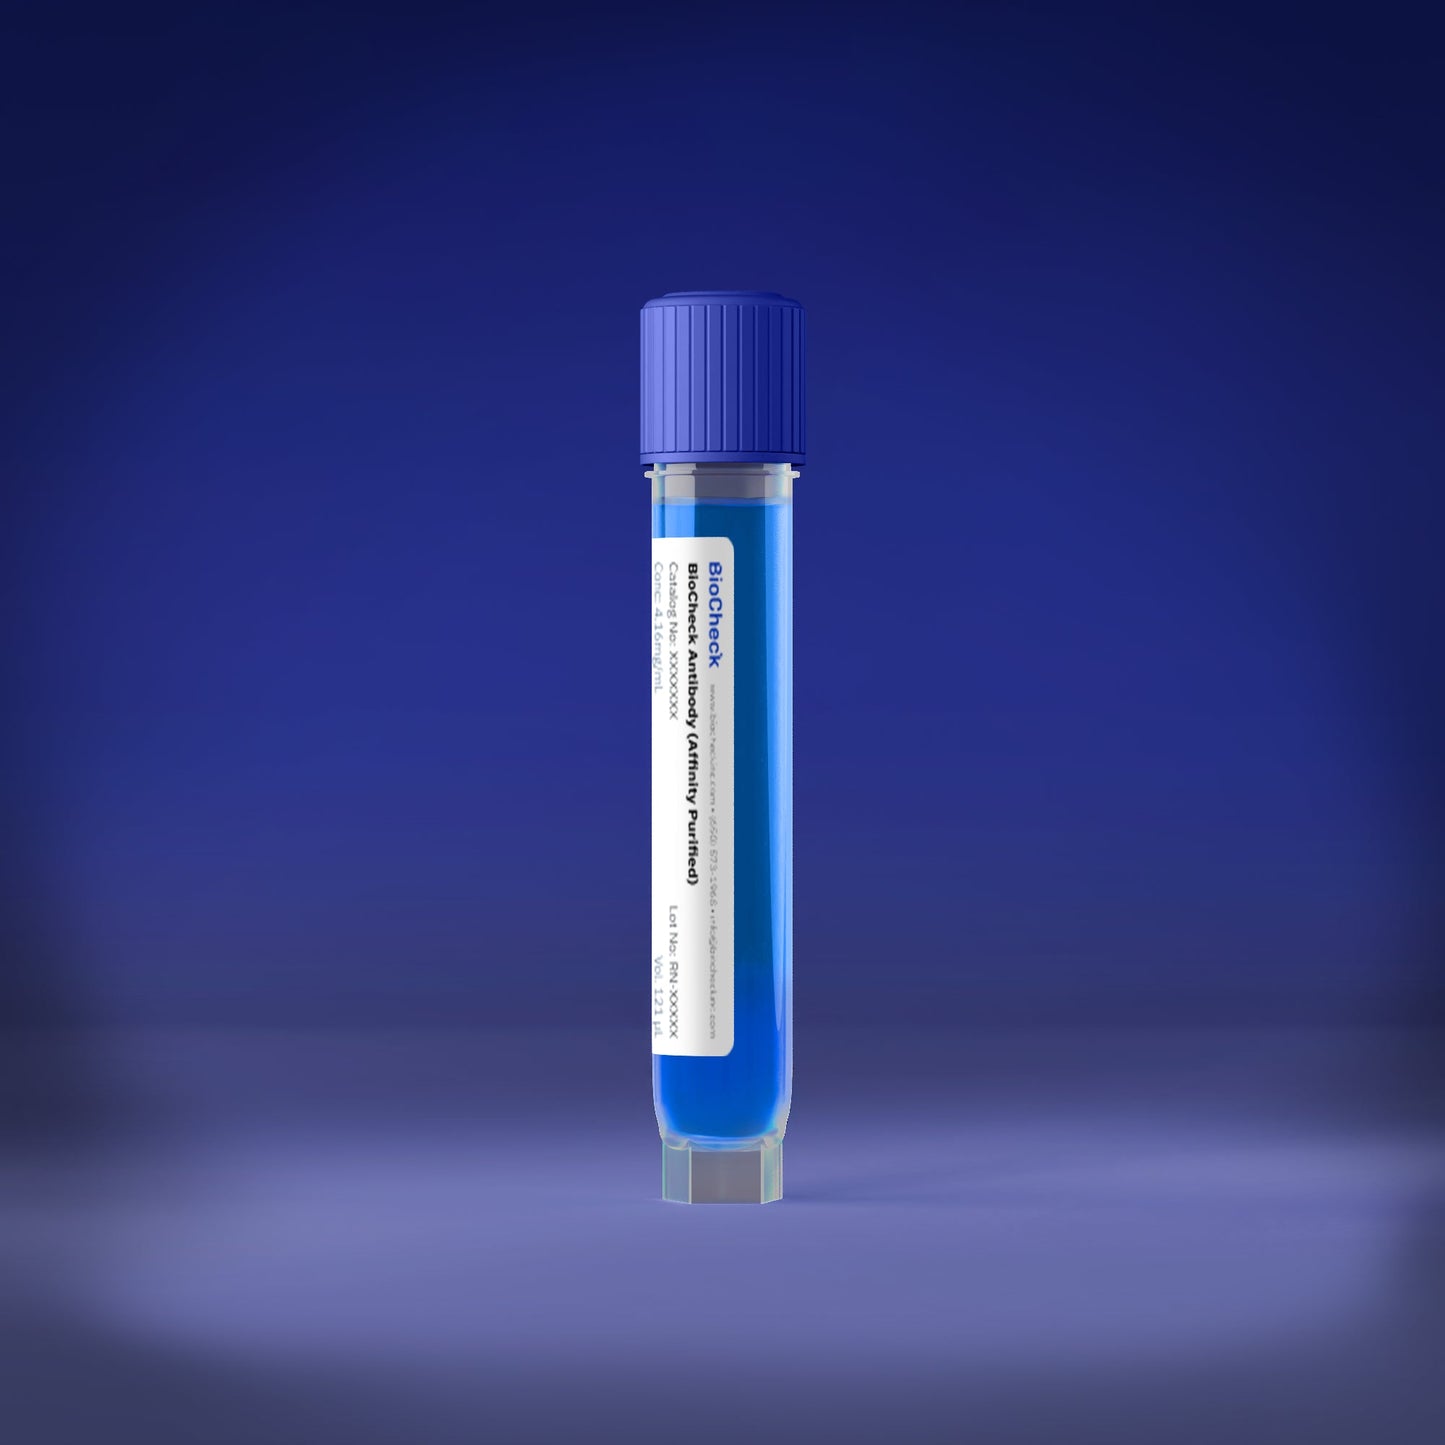 UCH-L1 Mouse Monoclonal Antibody  (Clone 1016)